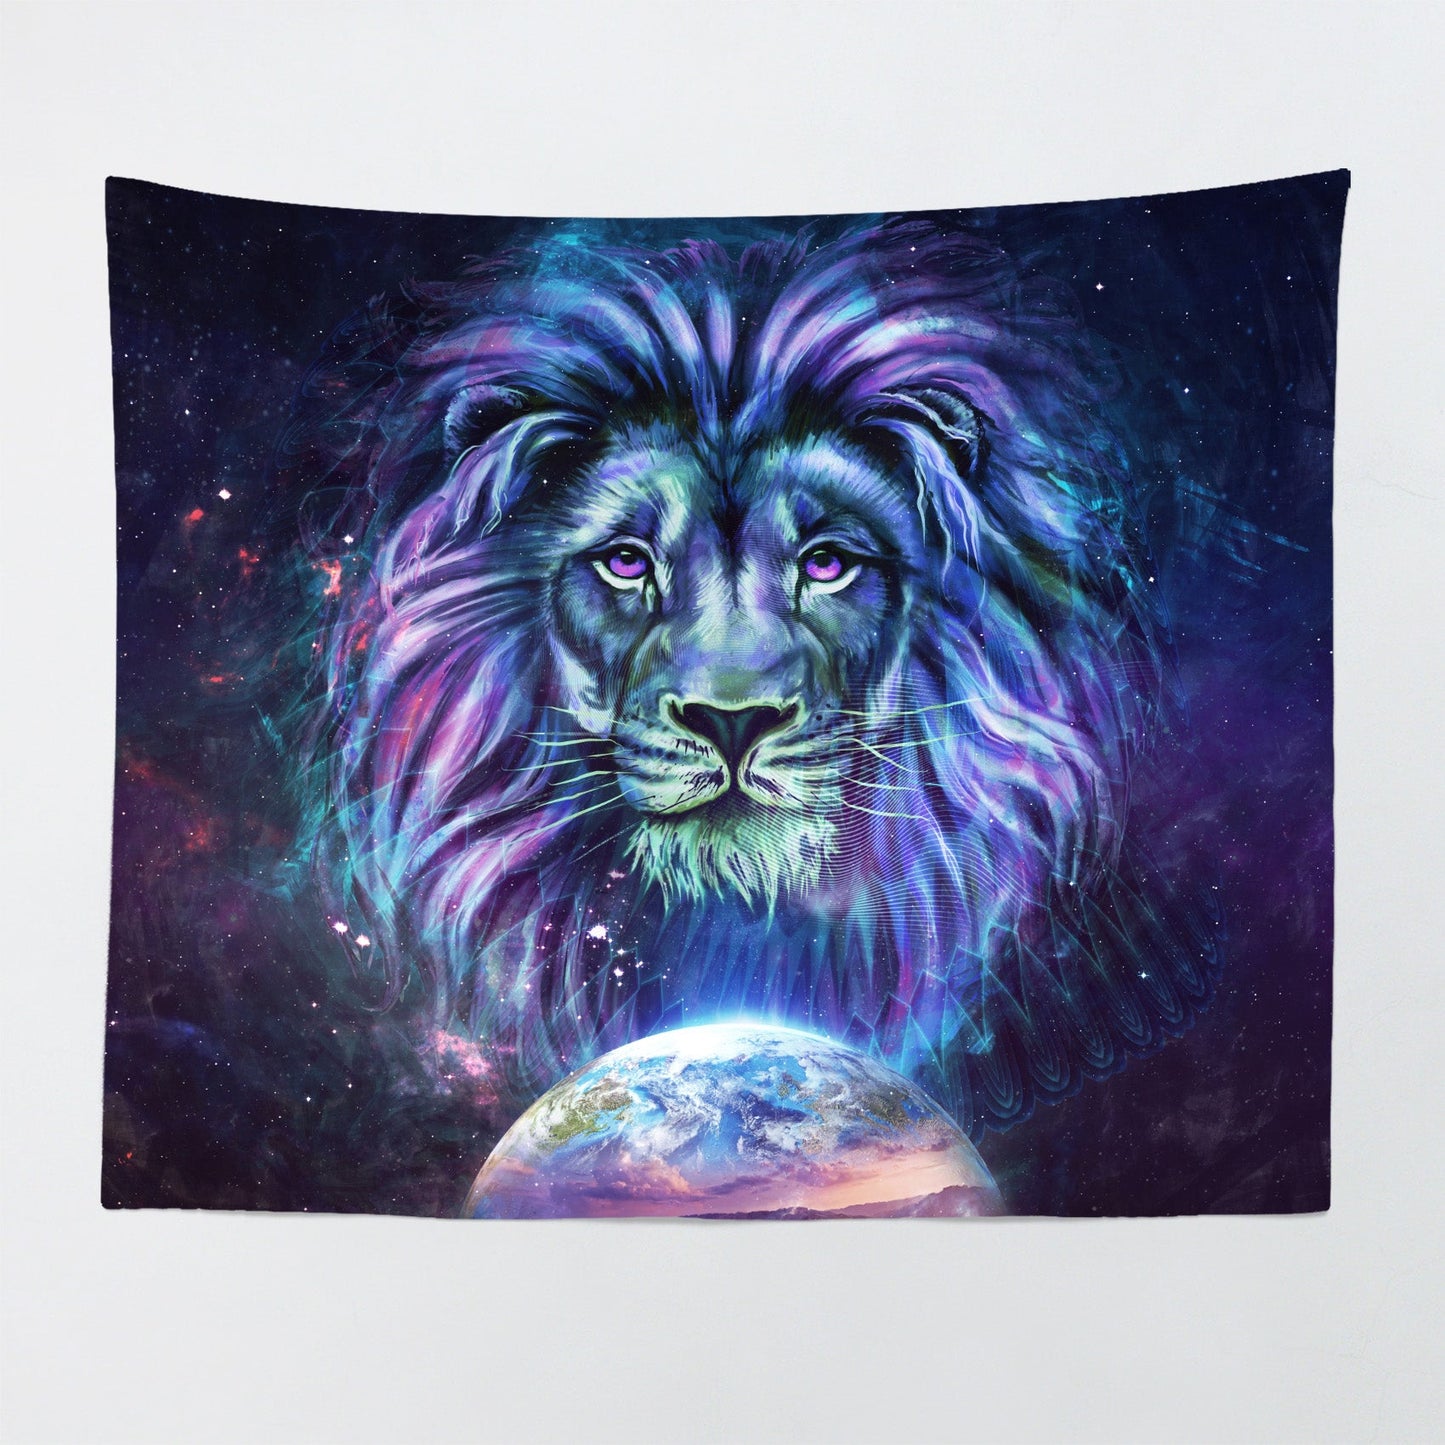 Guardian Visionary Art wall tapestry by Cameron Gray